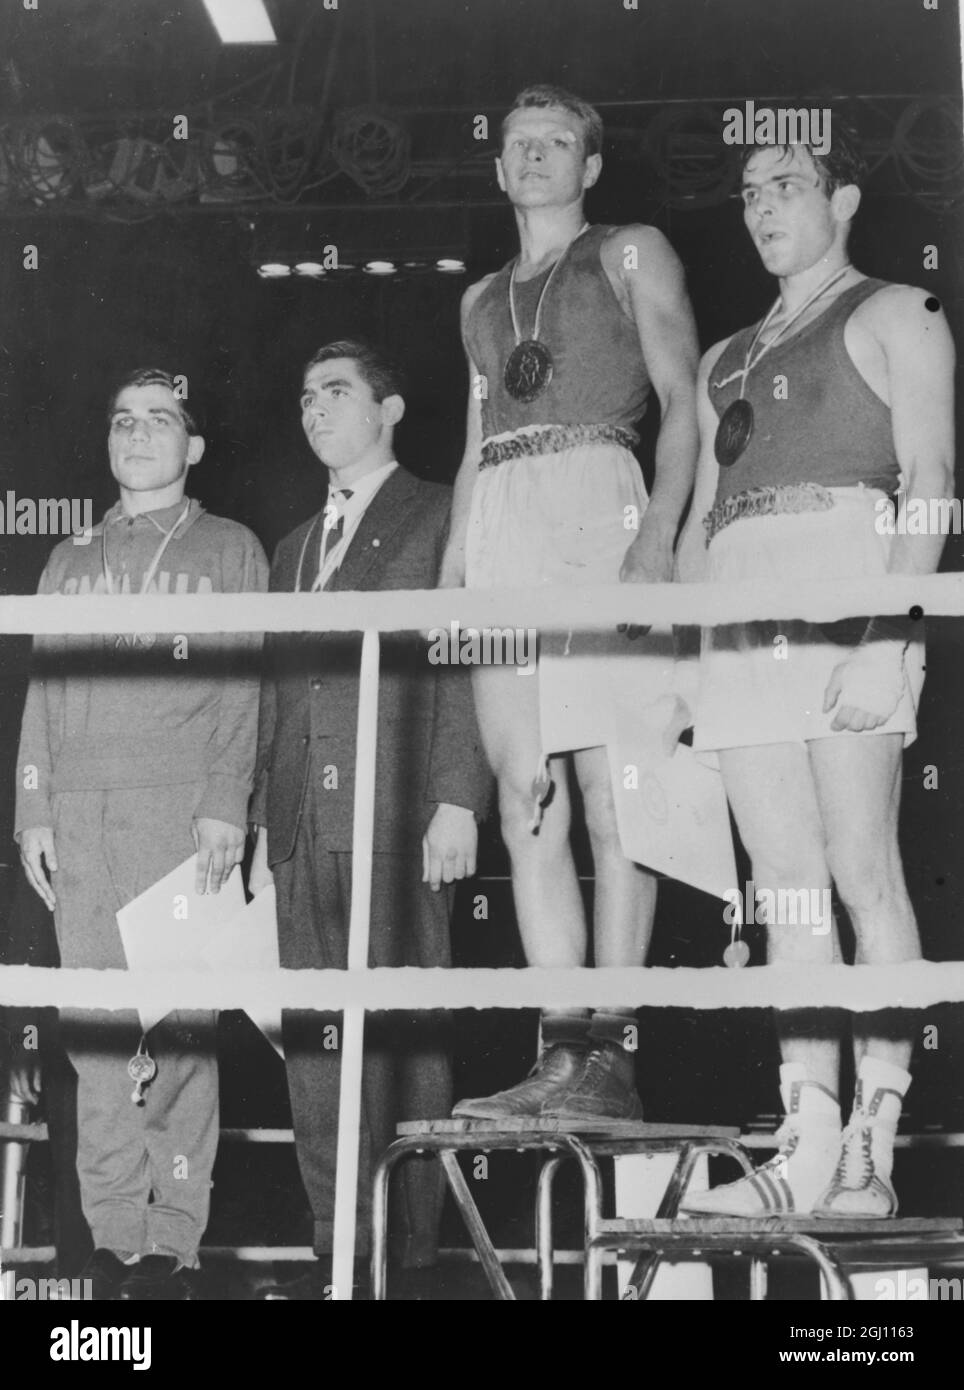 Russia's BORIS LAGUTIN takes the winners podium after taking the Gold Medal for the light middleweight bout in the European Amateur Boxing Championships 10 June 1961 . He beat DIETER NEIDEL of East Germany AND ERIH SCHICHTA of West Germany and Rumanian VIRGIL BADEA - IN BELGRADE , SERBIA . 13 JUNE 1961 Stock Photo